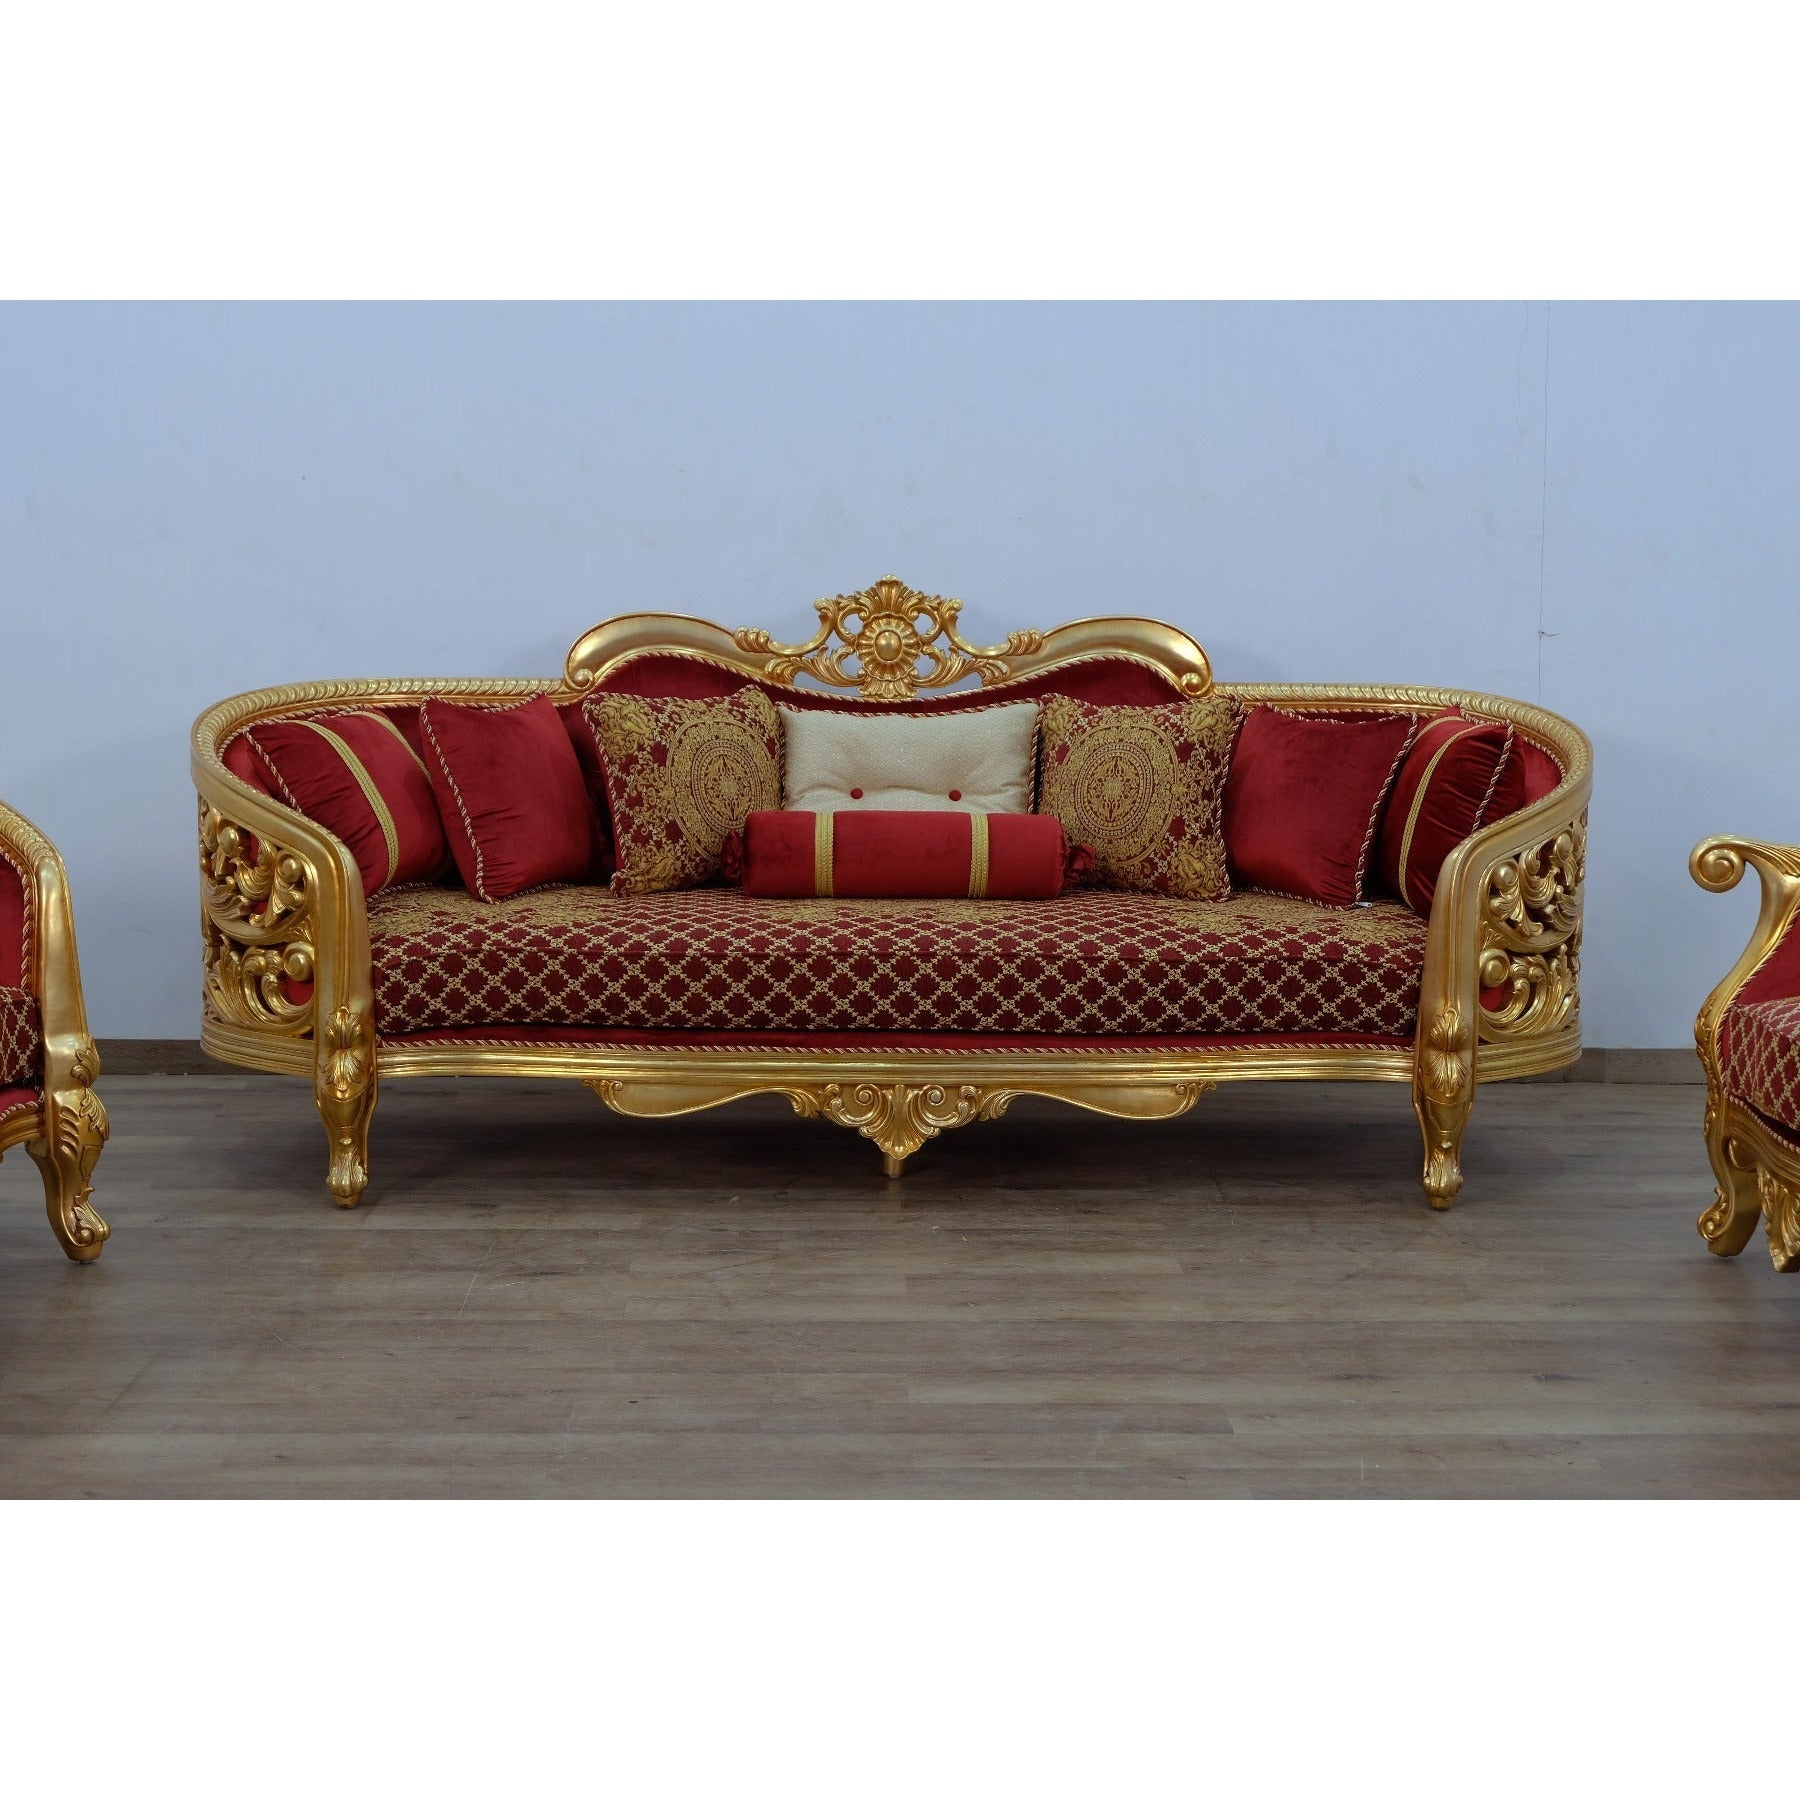 European Furniture - Bellagio II 2 Piece Living Room Set in Red-Gold - 30013-2SET - New Star Living